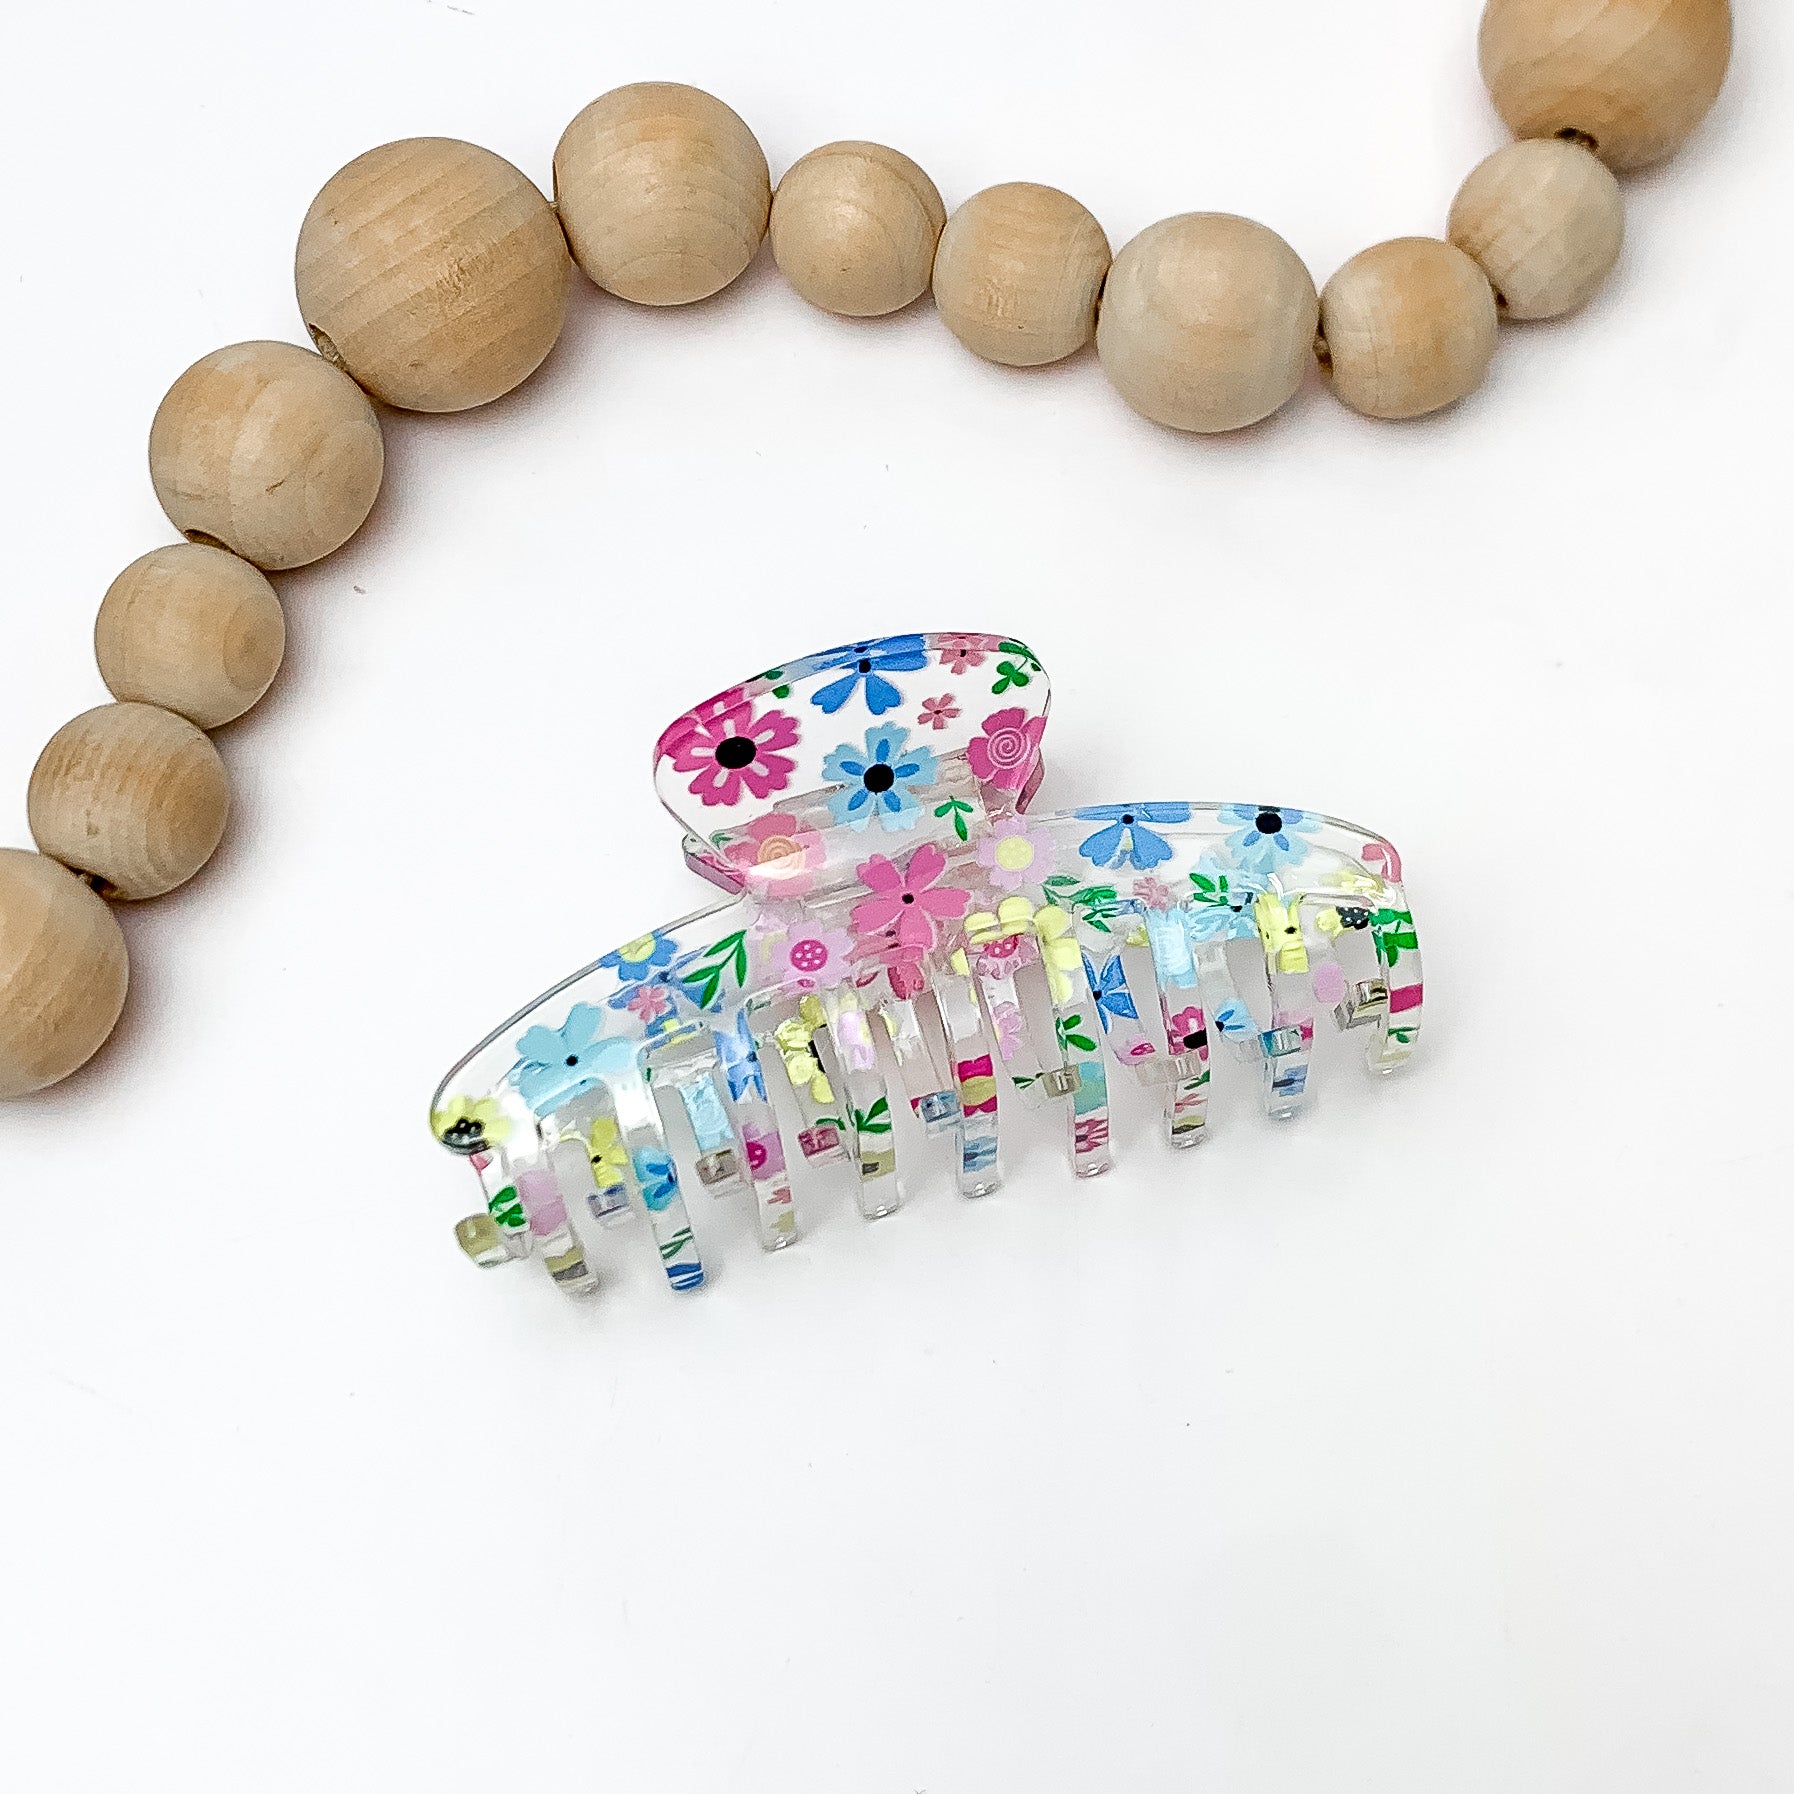 Flower Fields Hair Clip in clear with multicolor flowers. Pictured on a white background with wood beads above the hair clip.